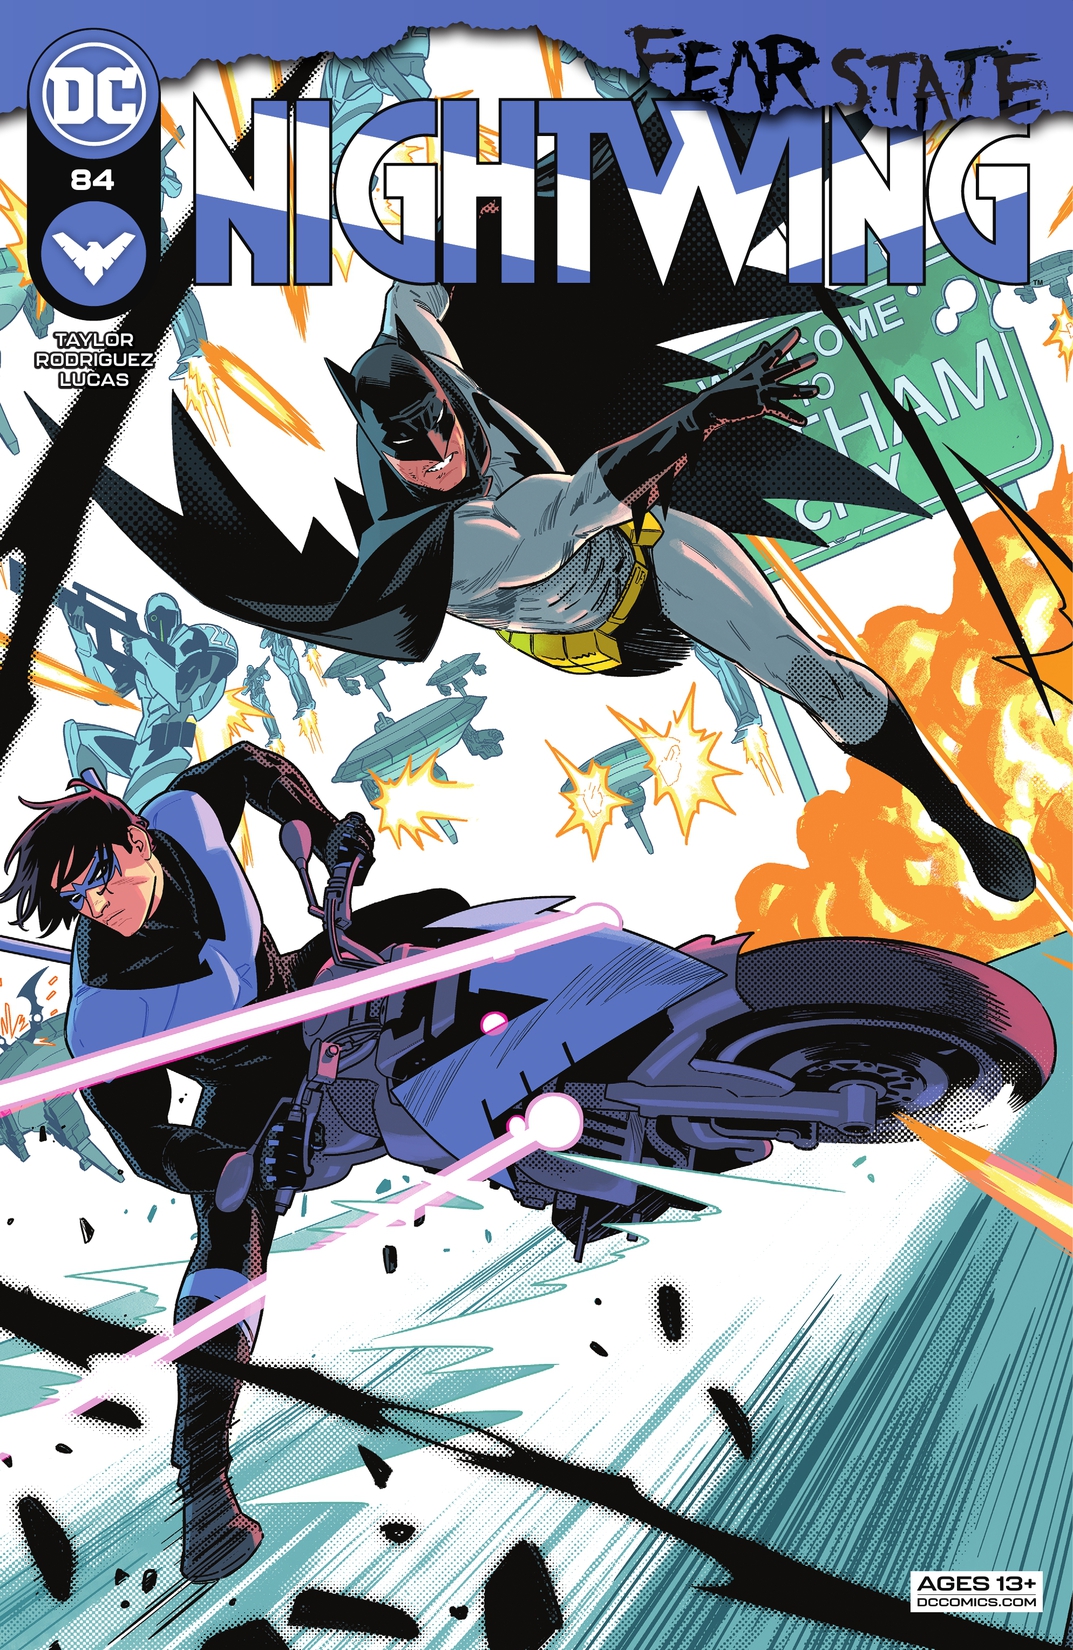 Nightwing (2016-) #84 preview images